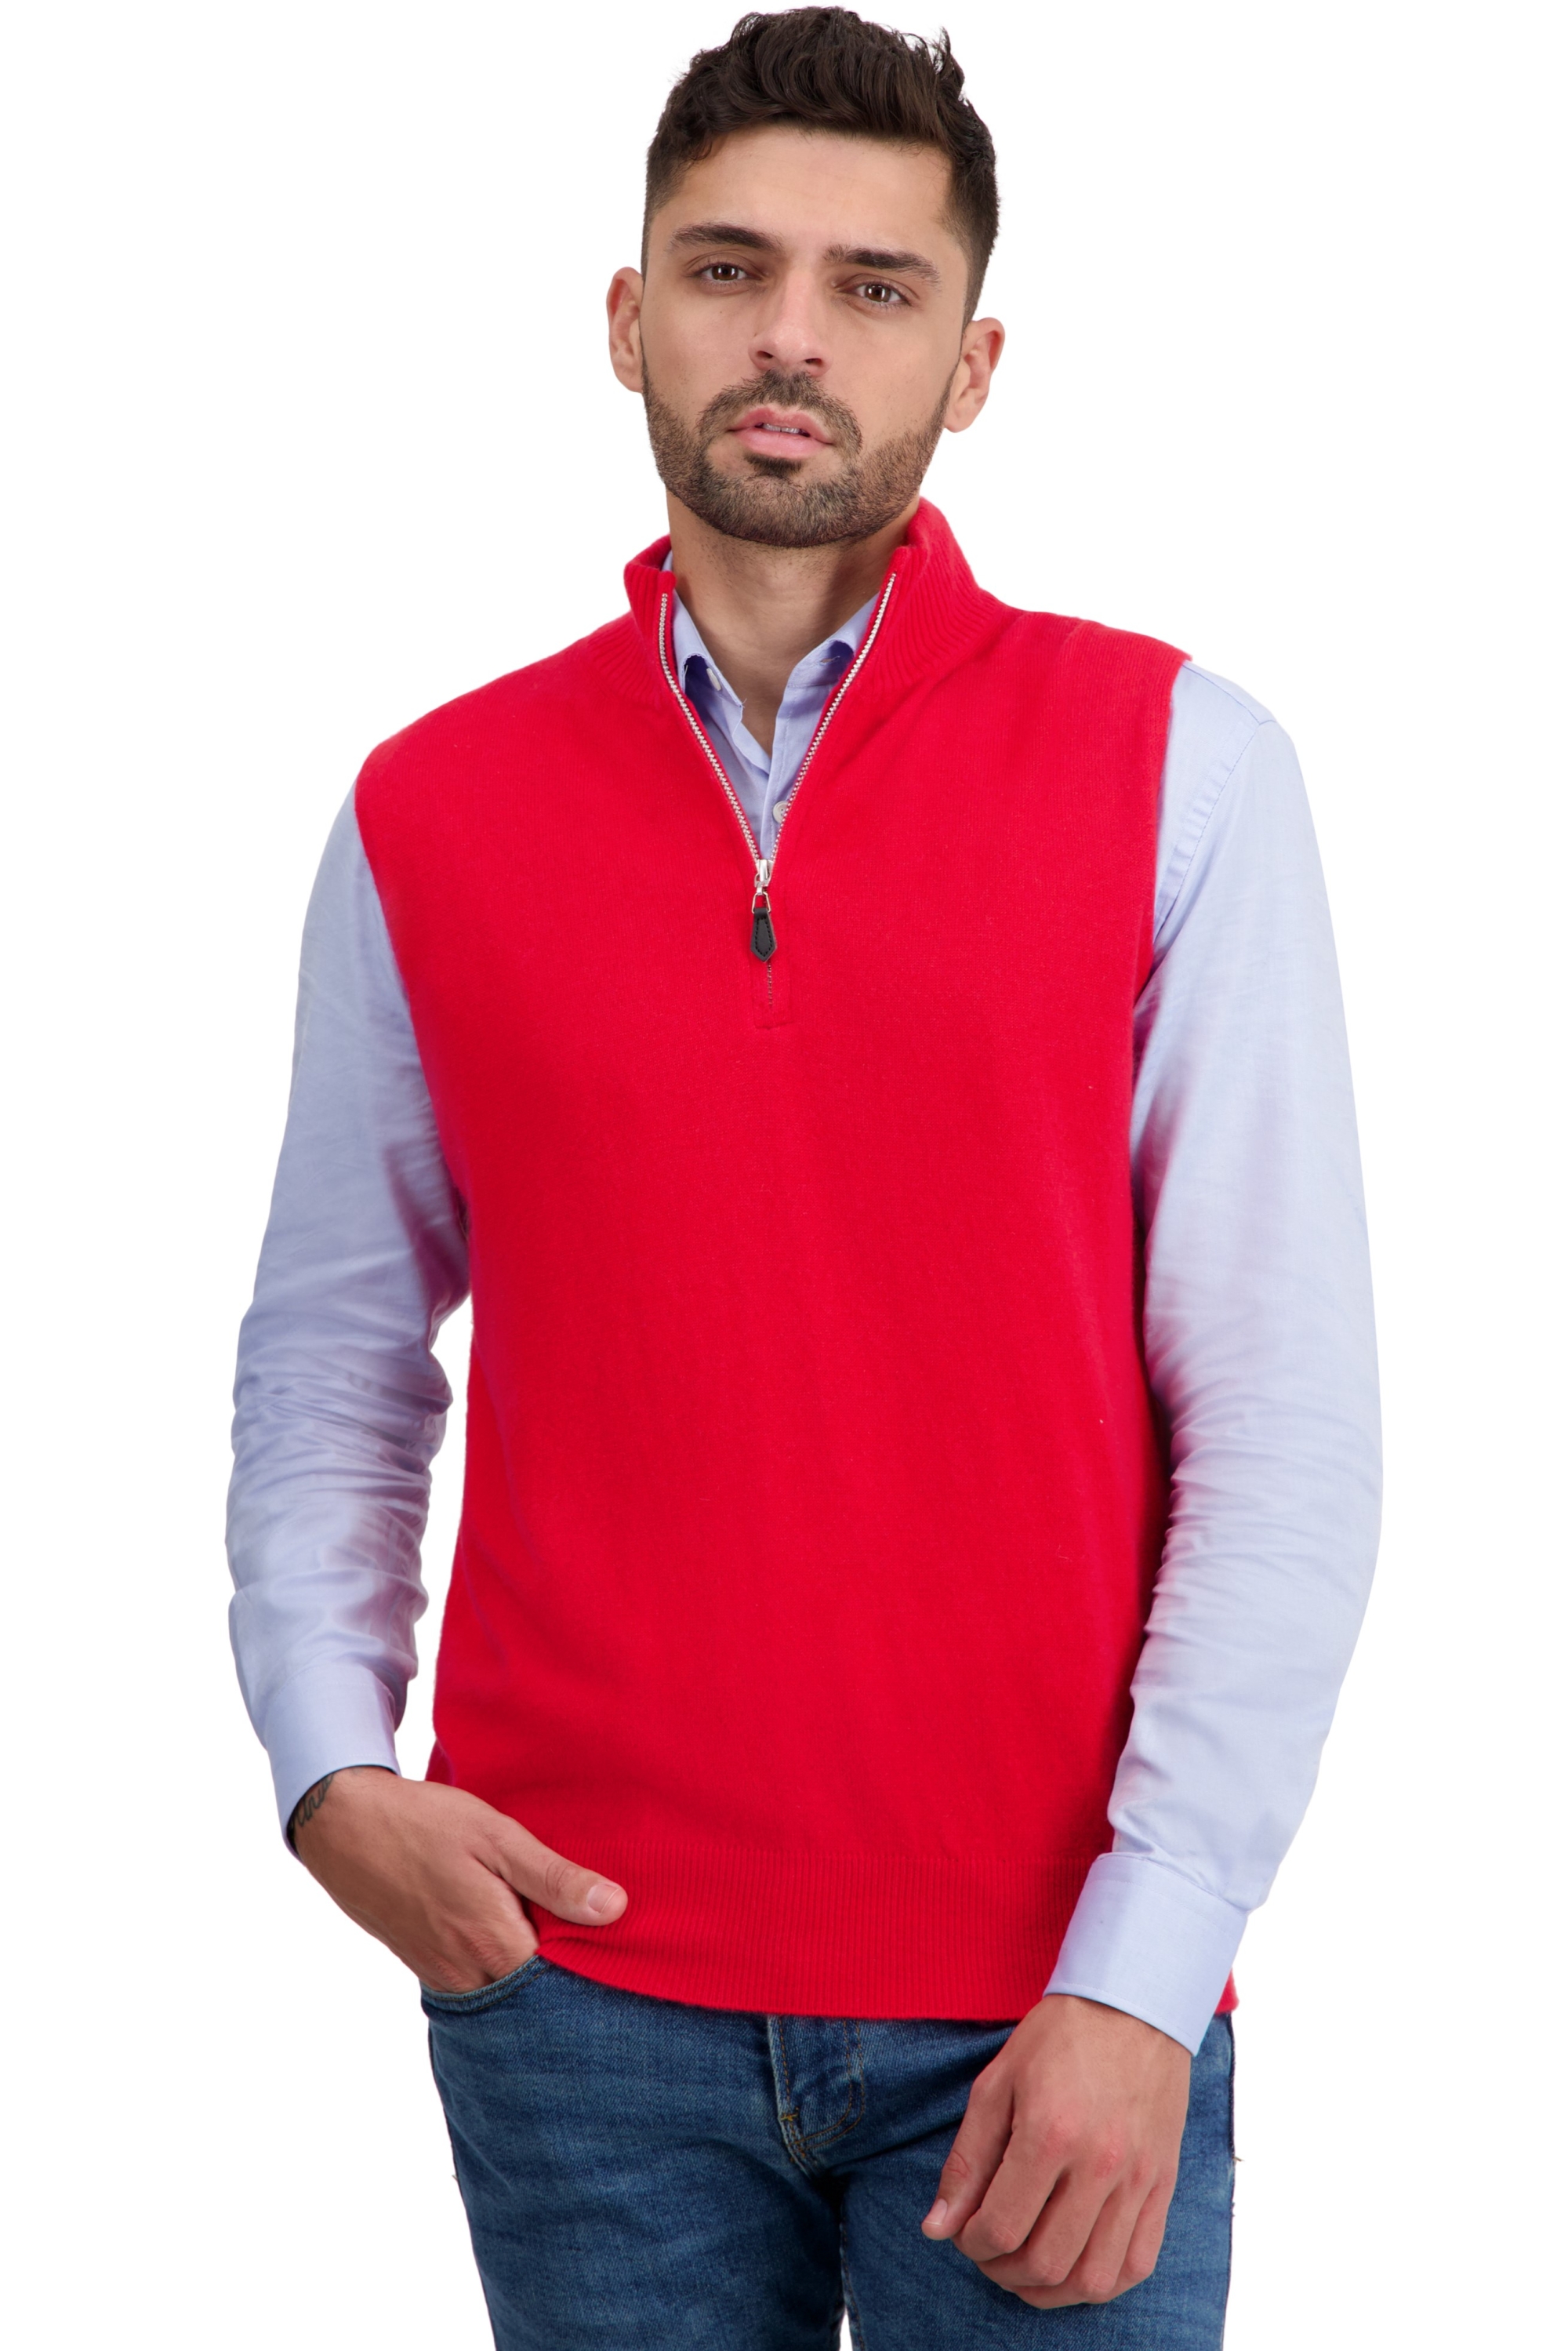 Cachemire pull homme texas rouge xl